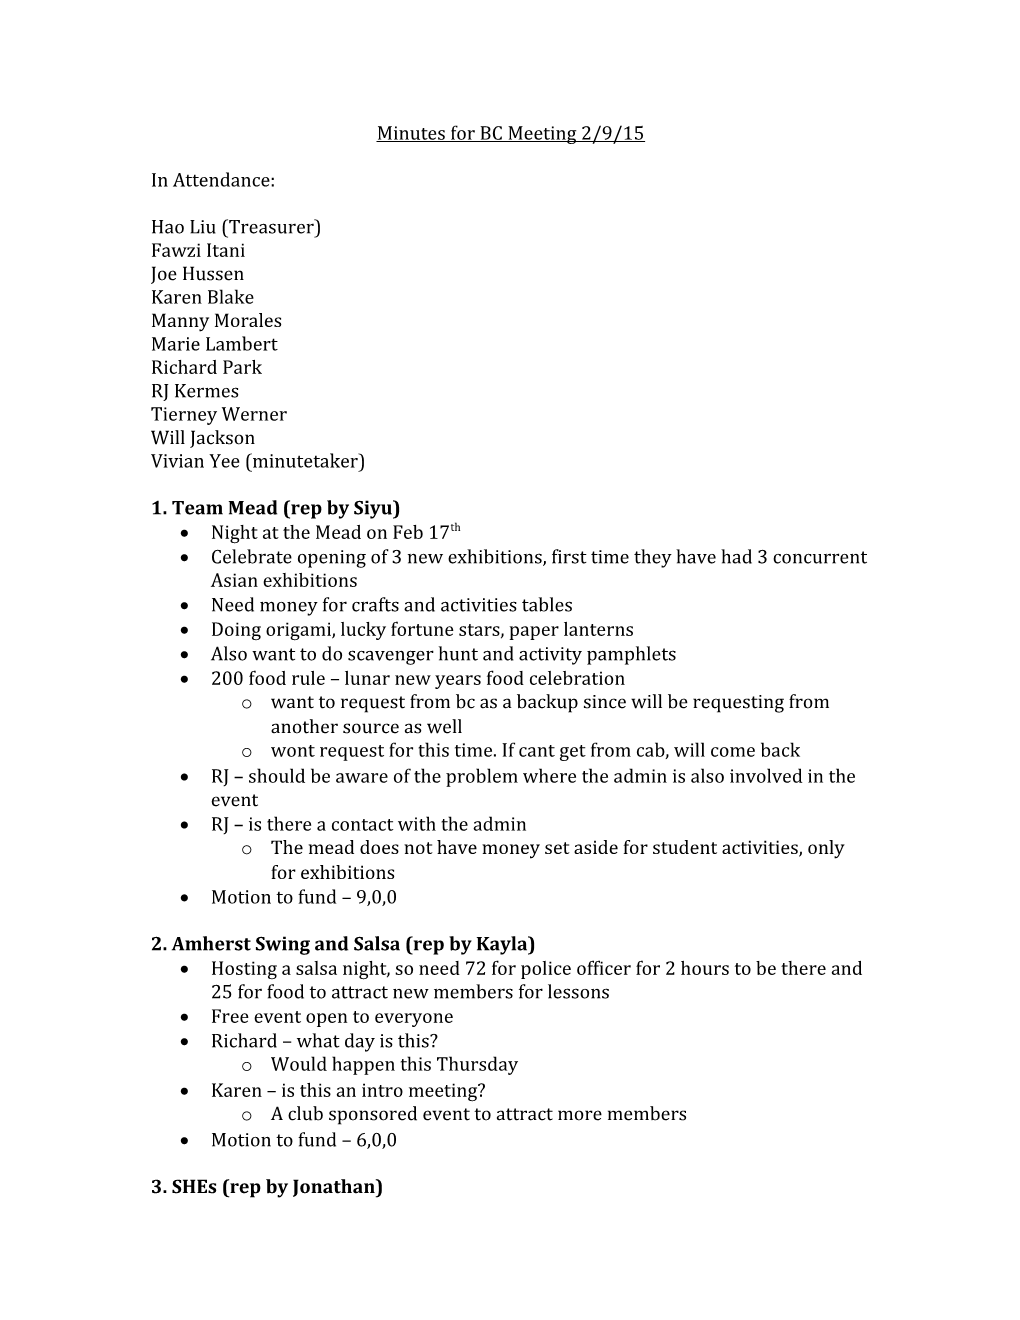 Minutes for BC Meeting 2/9/15